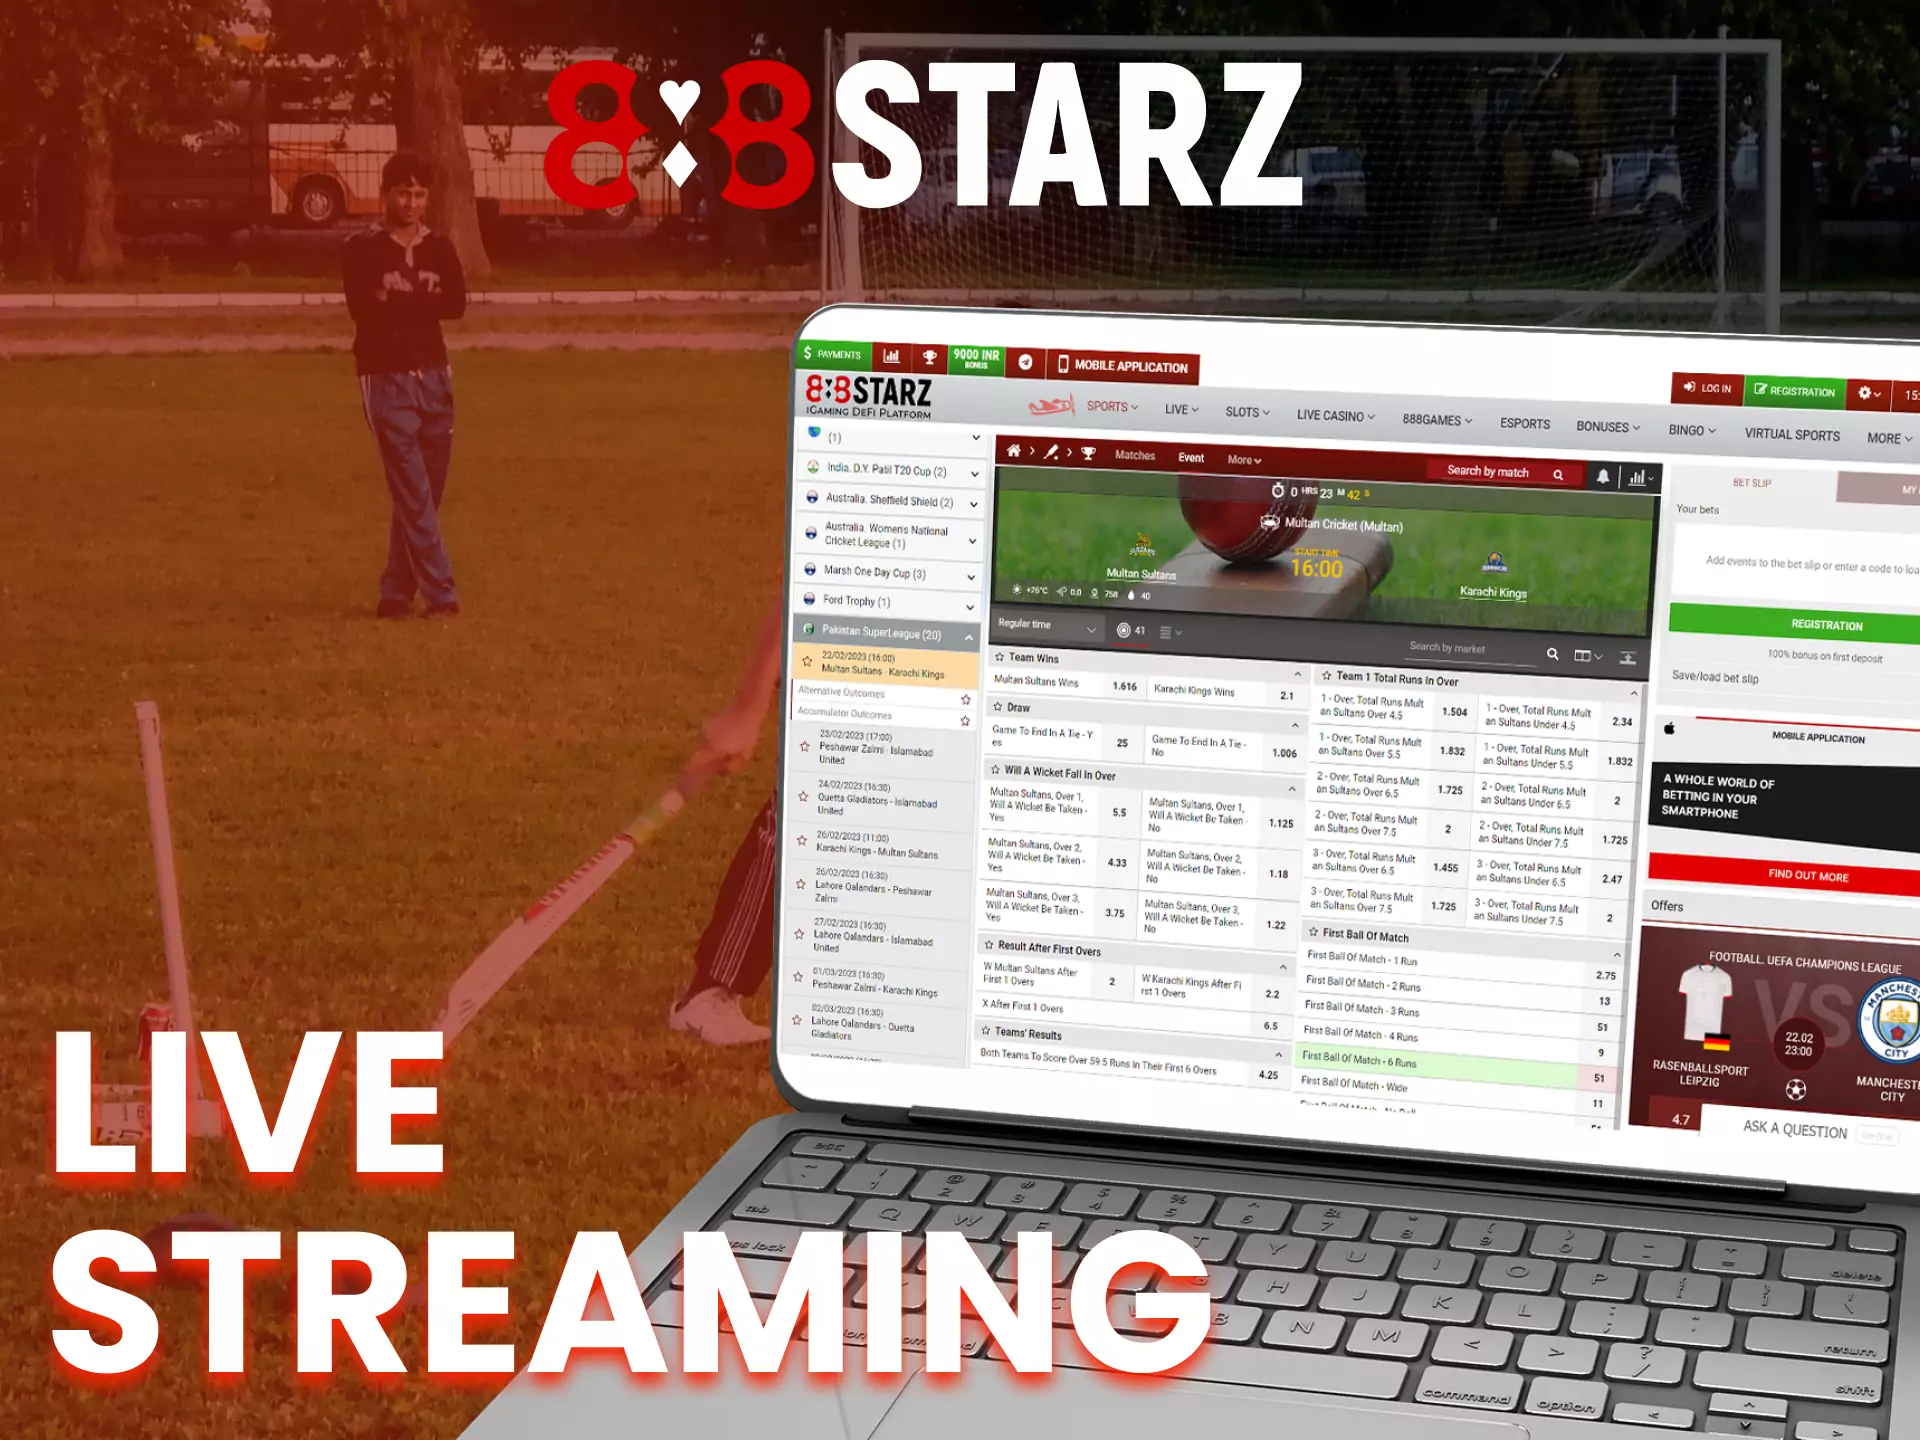 Watch sports games in live at 888starz.